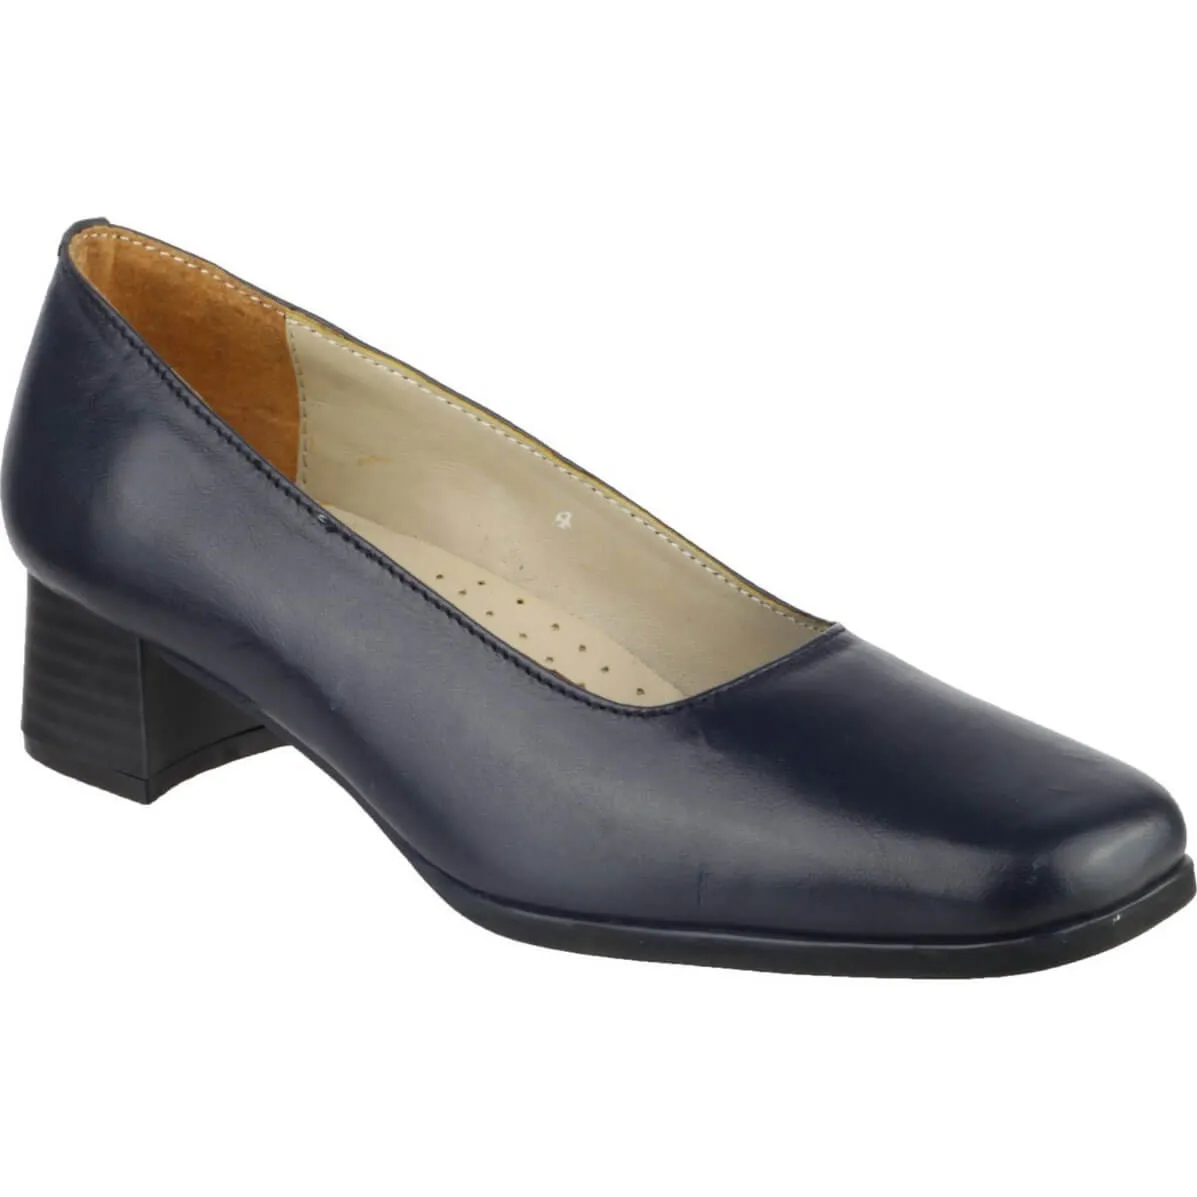 Amblers Walford Ladies Shoes Leather Court - Navy, Size 7.5